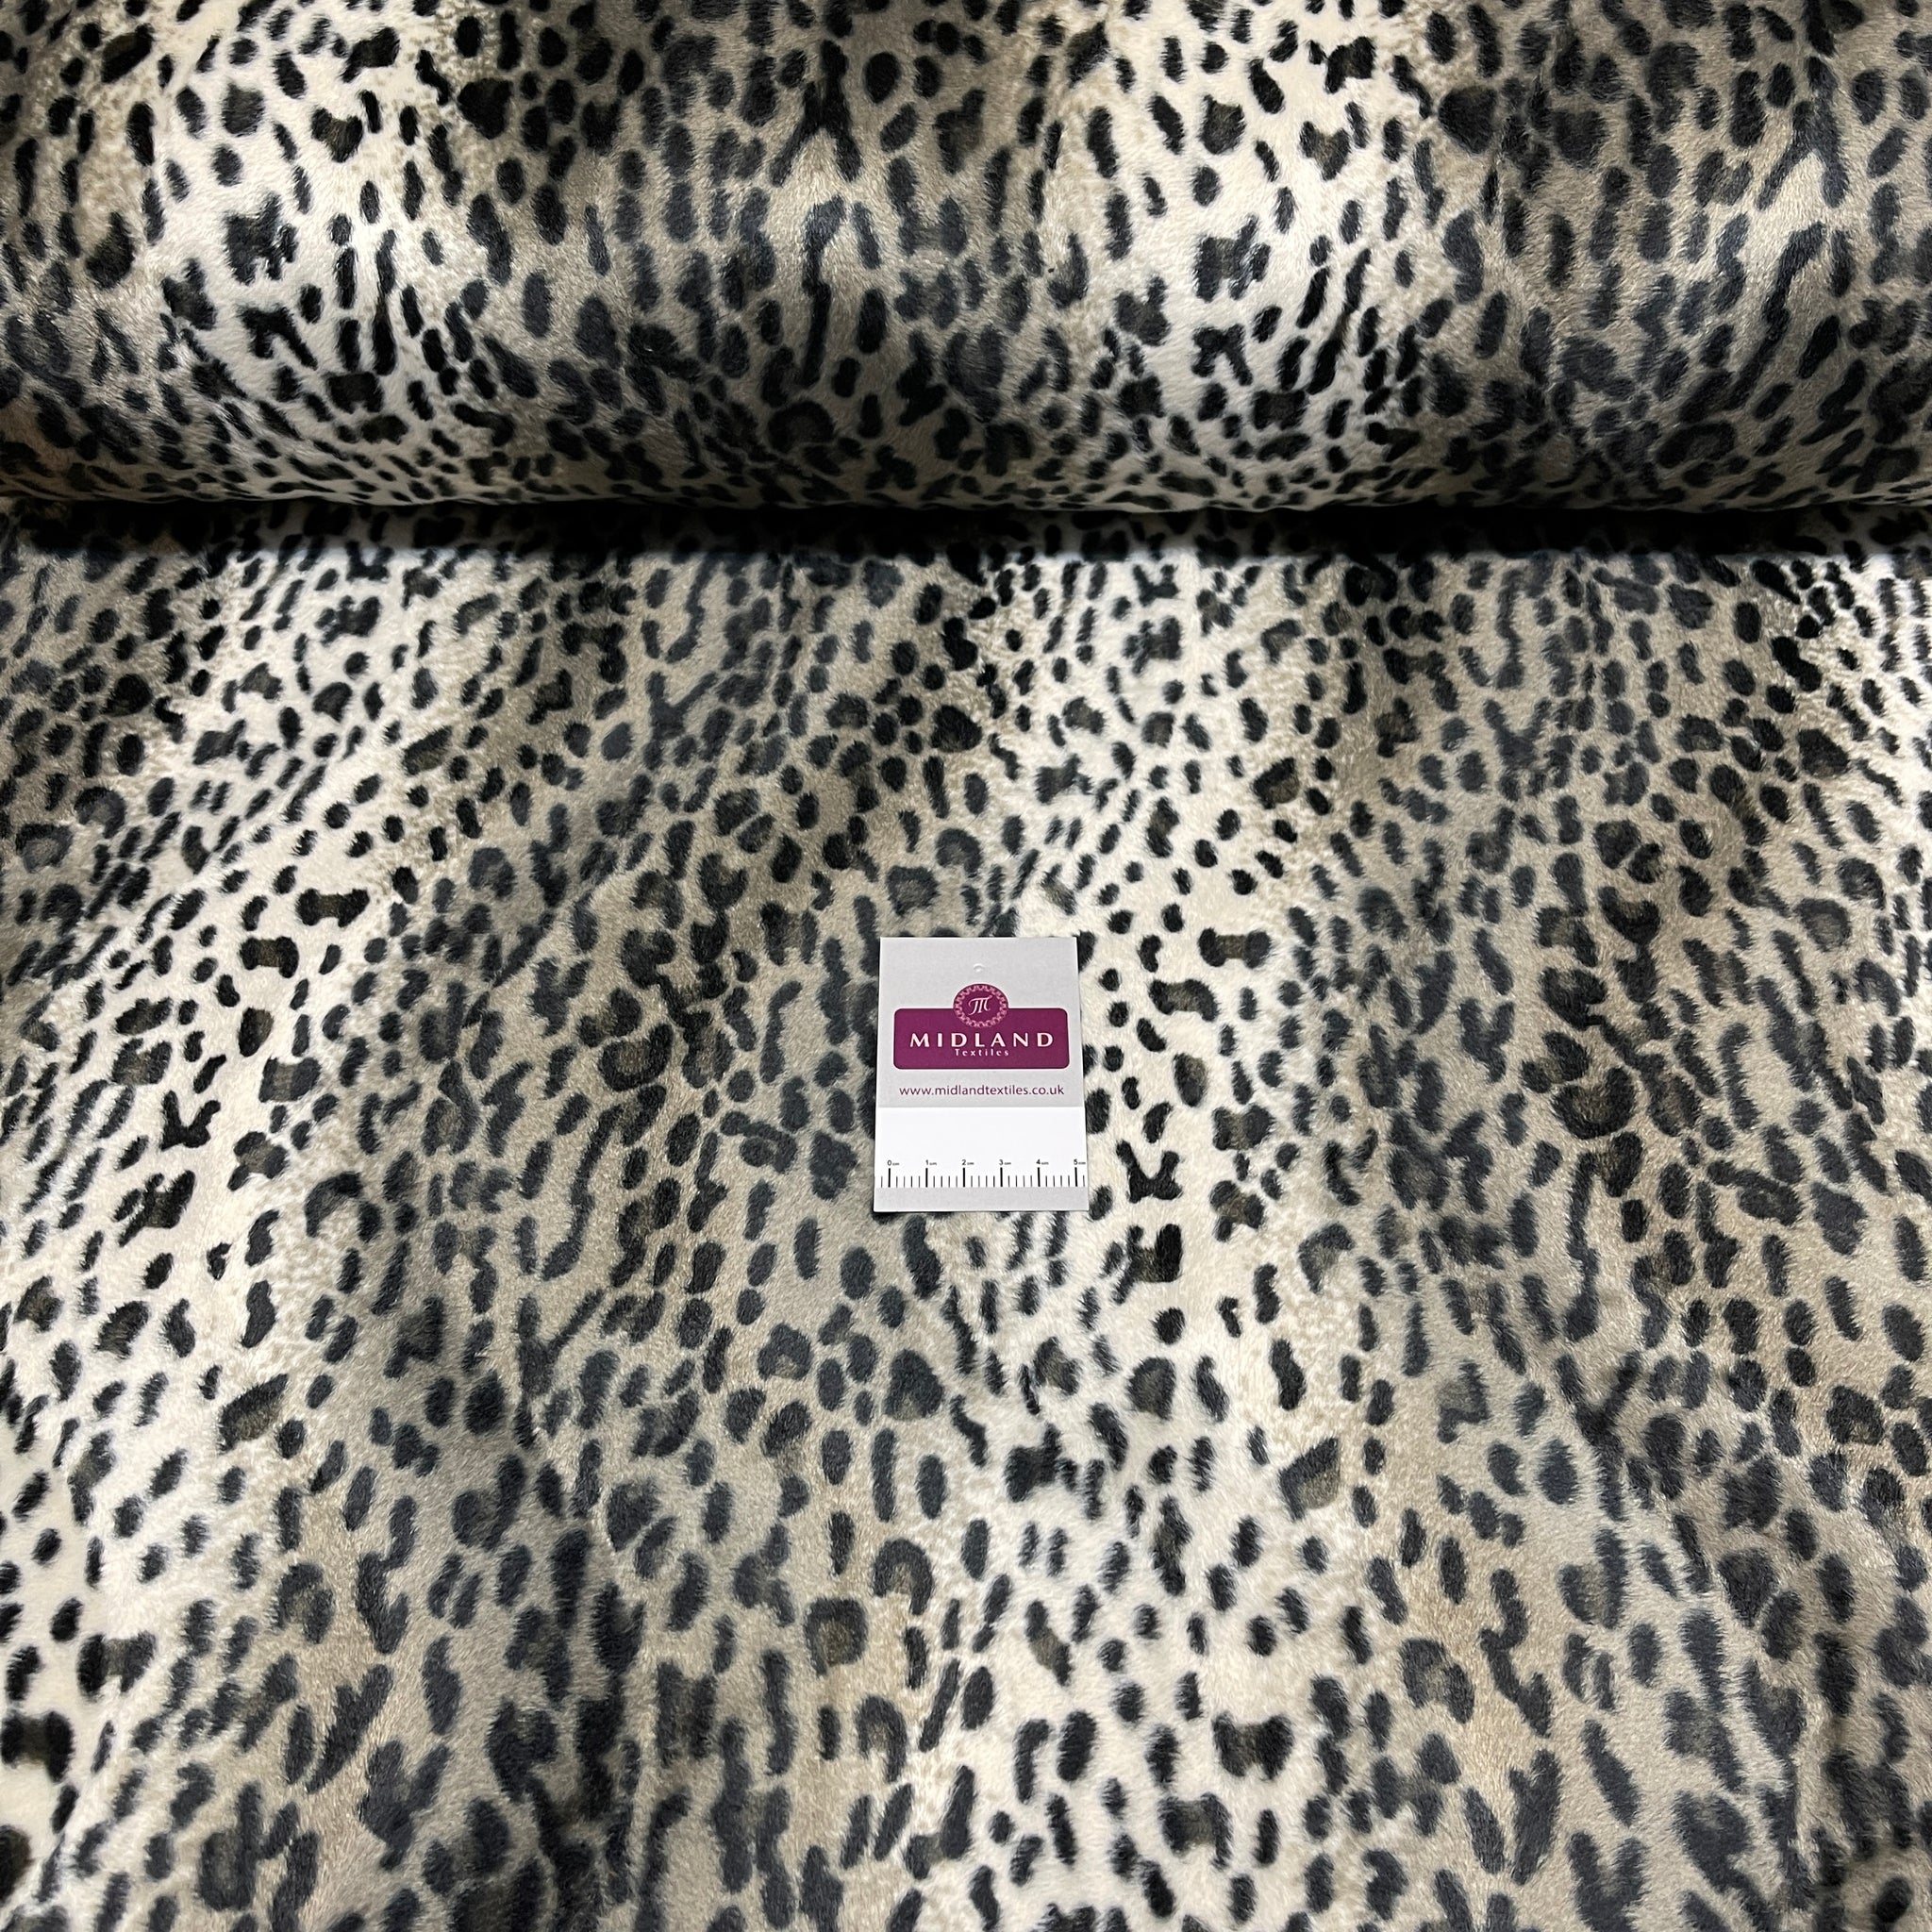 ANIMAL PRINT VELBOA FAUX FUR VELOUR FABRIC CRAFT MATERIAL 60" WIDE M220